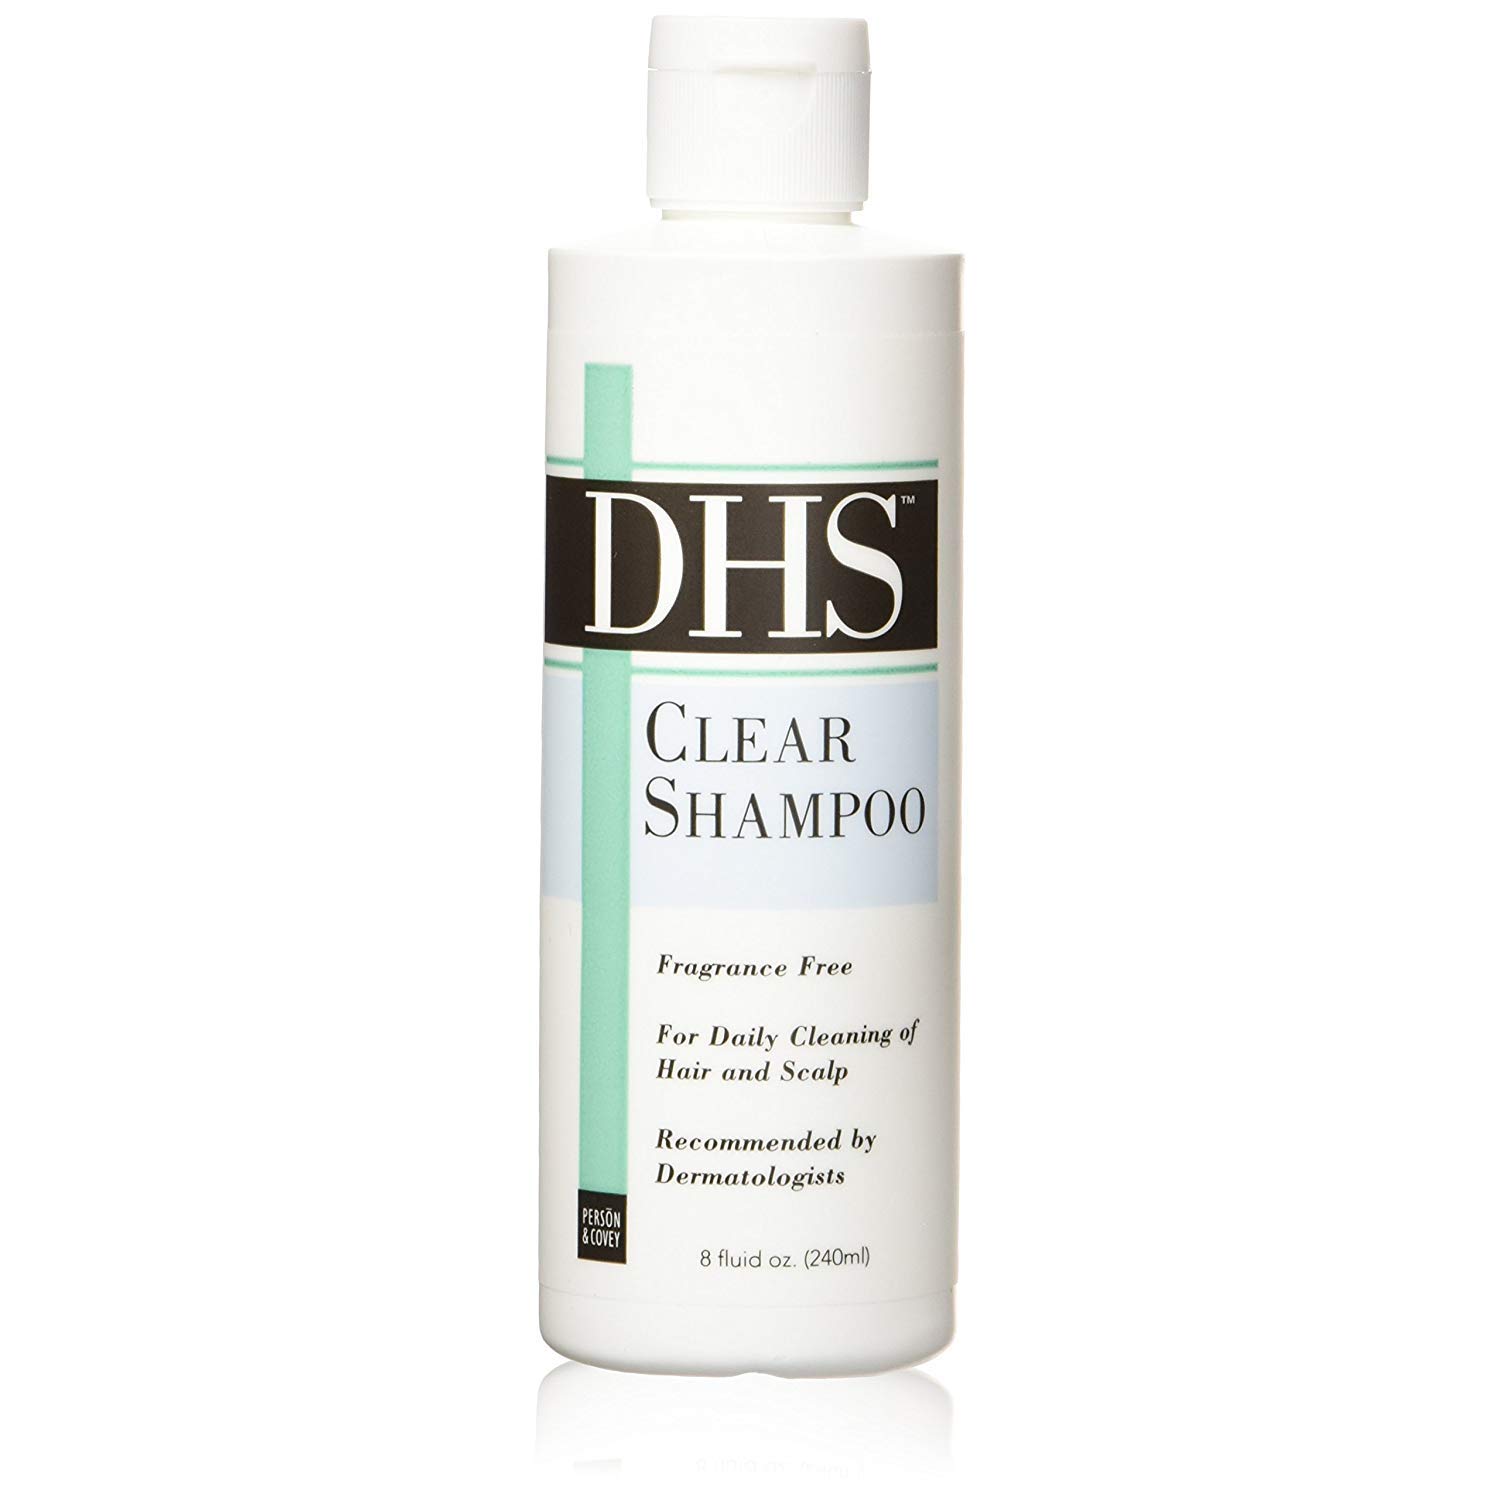 DHS Clear Shampoo, best shampoos for sensitive skin